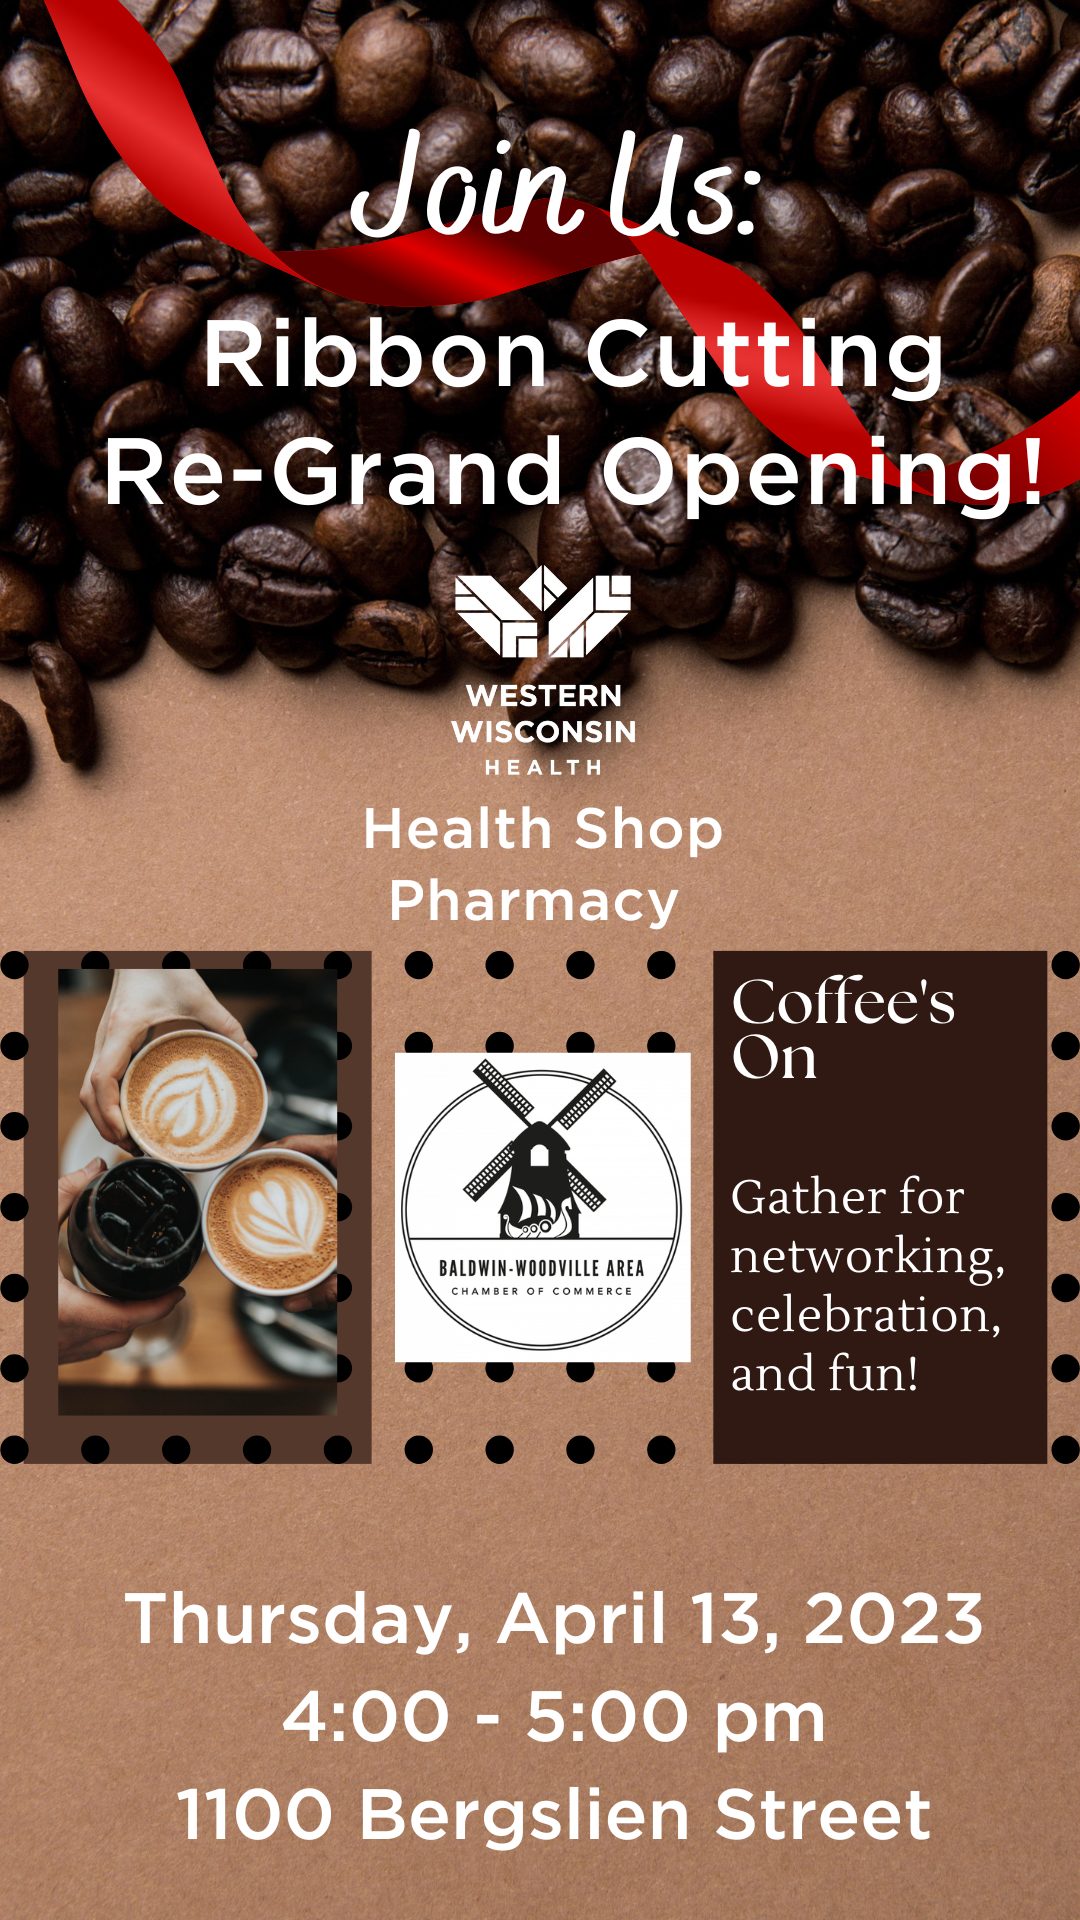 WWH Health Shop Pharmacy Re-Grand Opening ribbon cutting